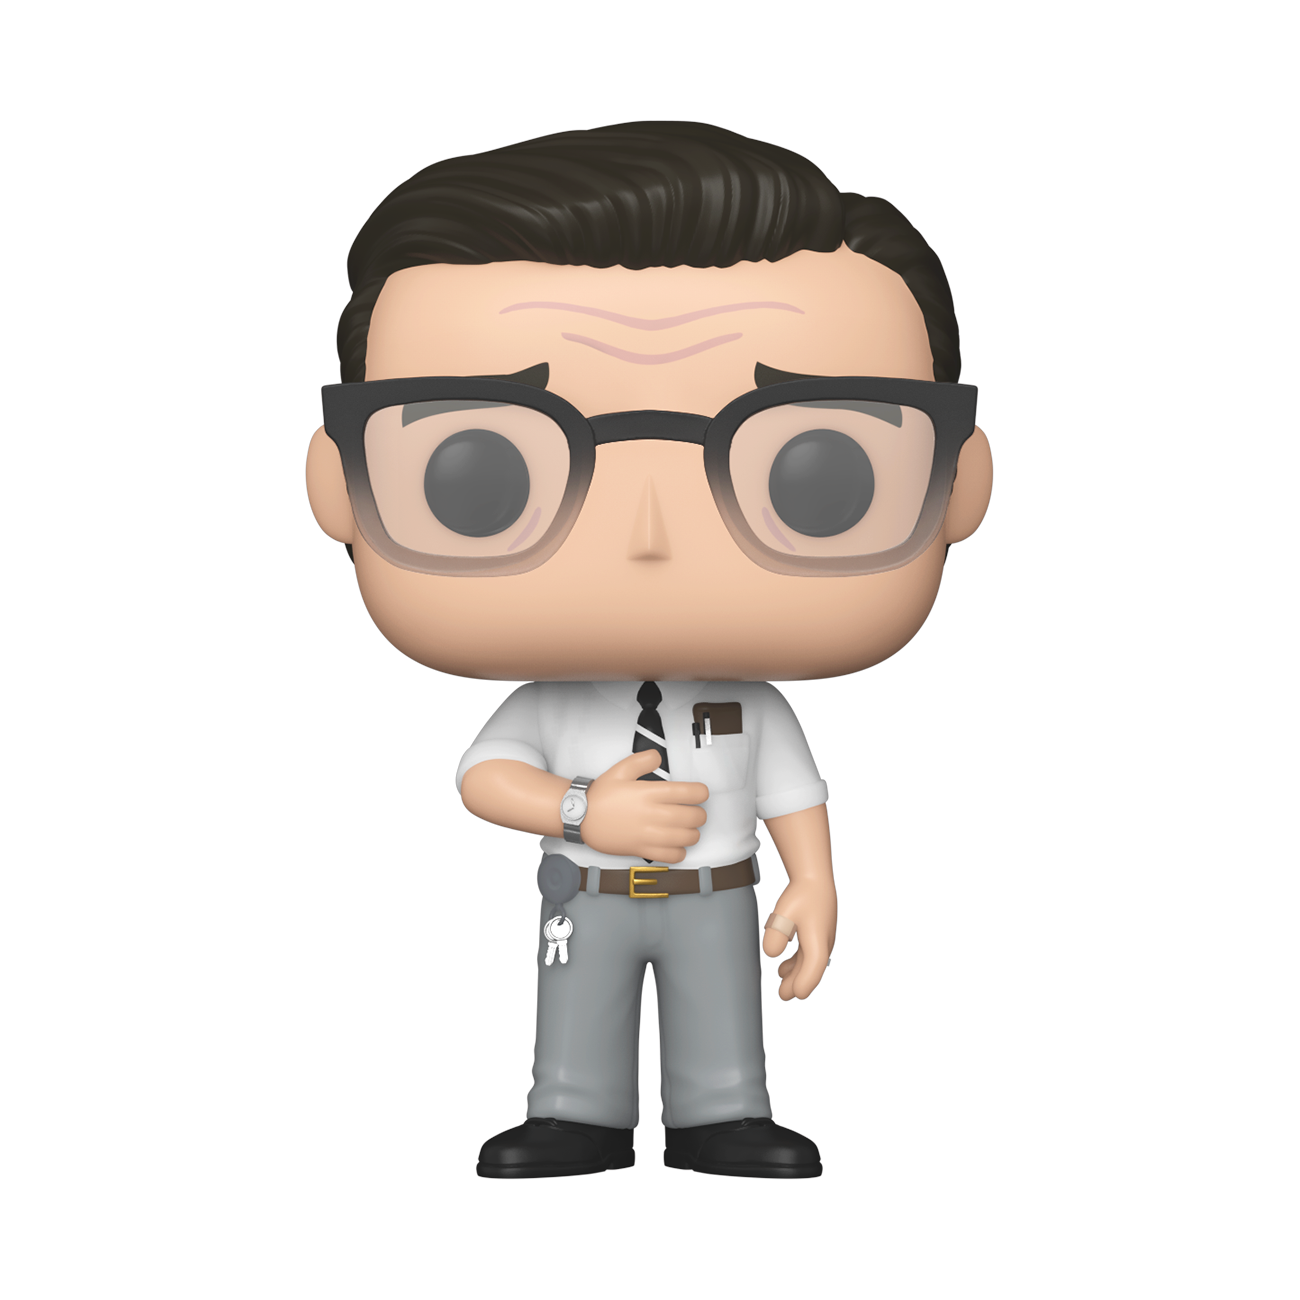 BackToTheFuture_GeorgeMcfly_Sculpt_GLAM-WEB.png